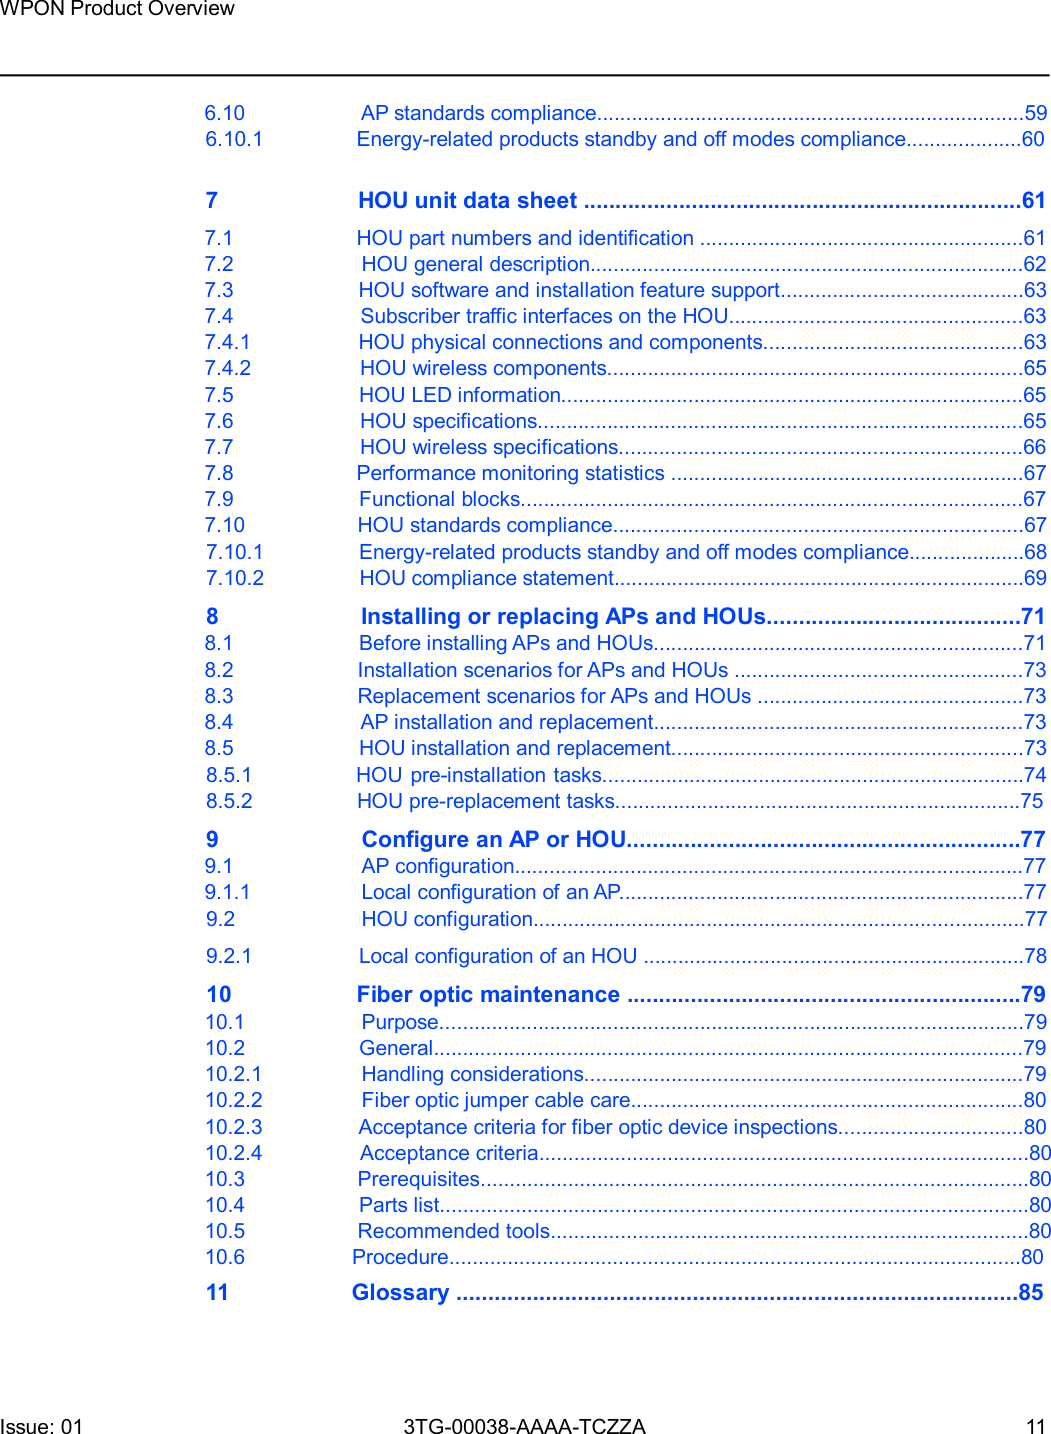 Page 11 of Nokia Bell 7577WPONAPED WPON User Manual WPON Product Overview